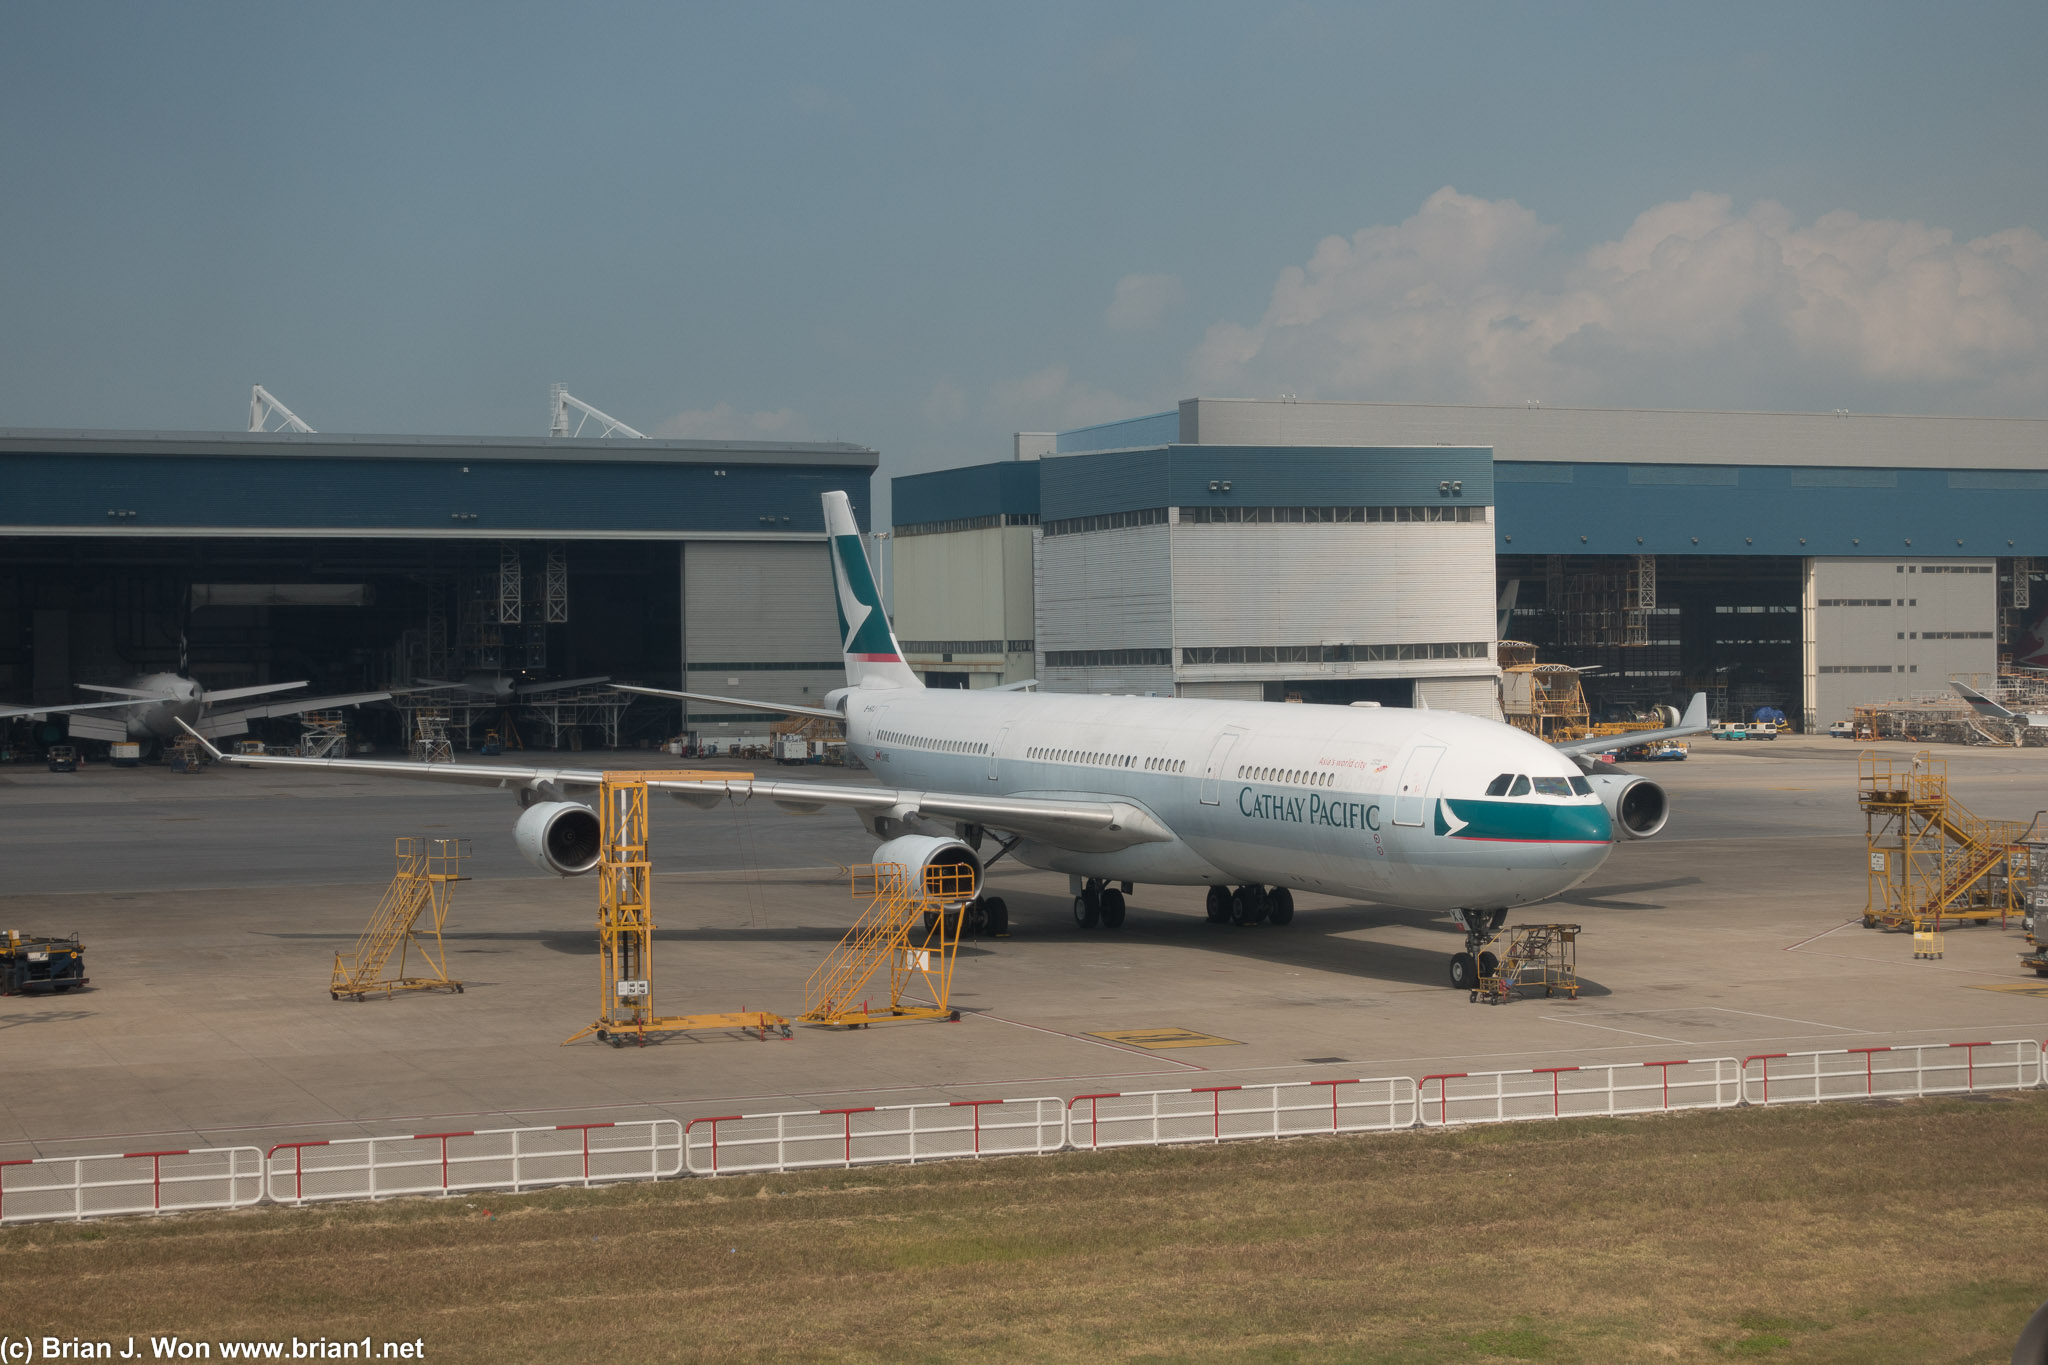 Cathay Pacific Airbus A340-300. All going to the boneyard soon, much like the 747-400.